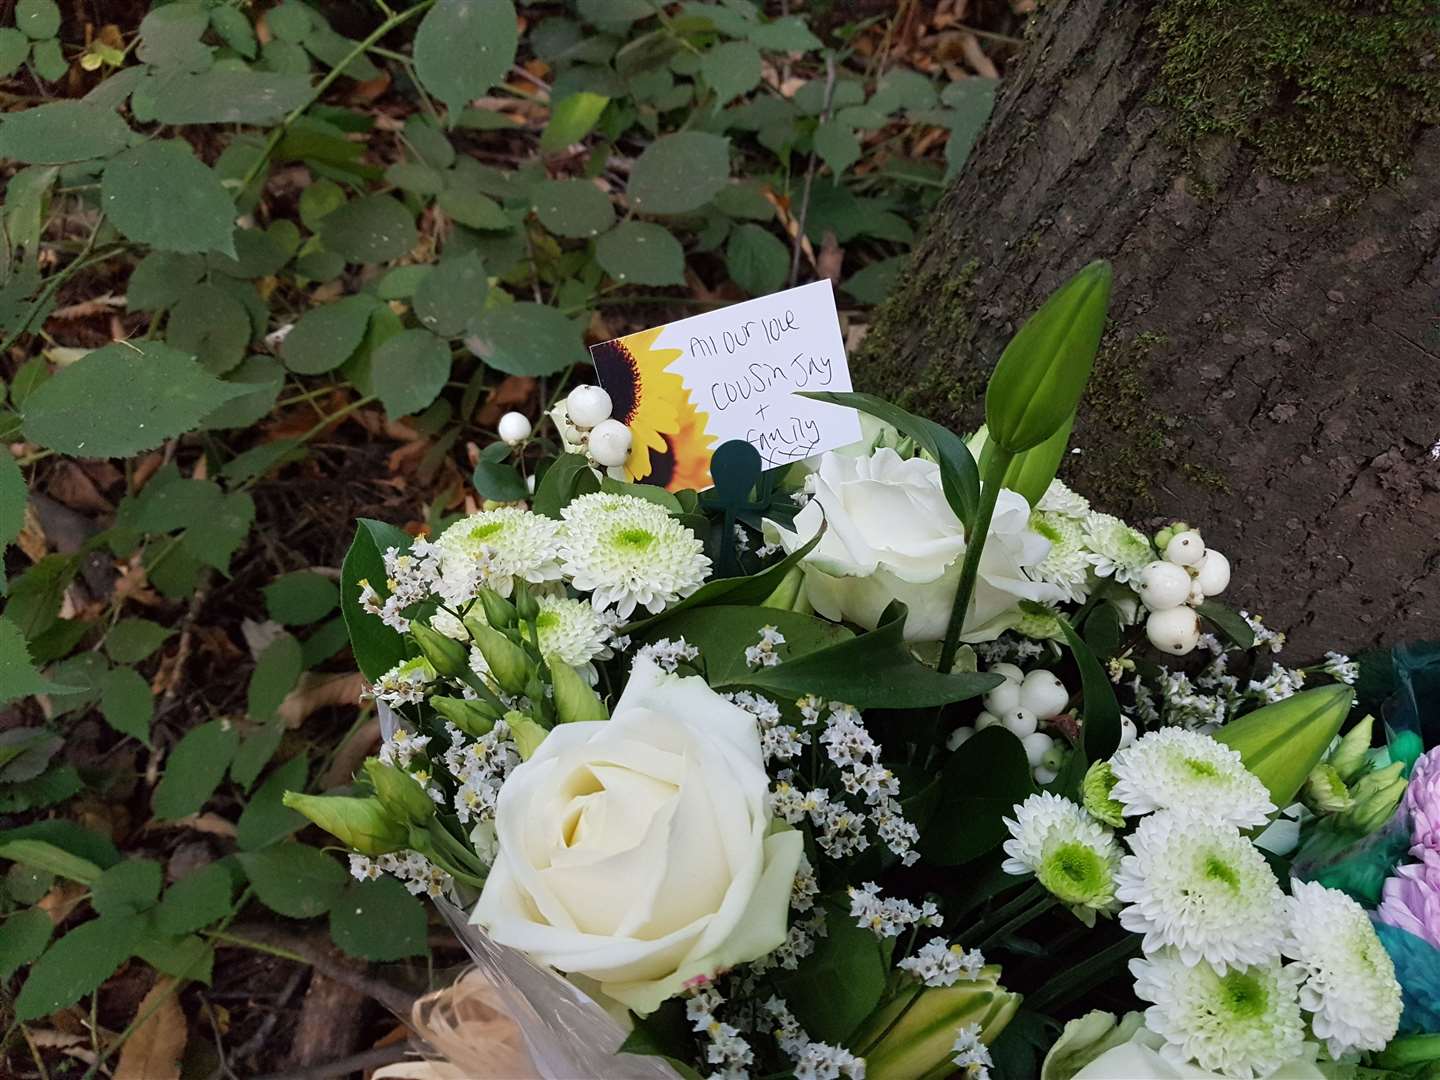 Floral tributes left at the scene of the crash in Kingswood (42351641)